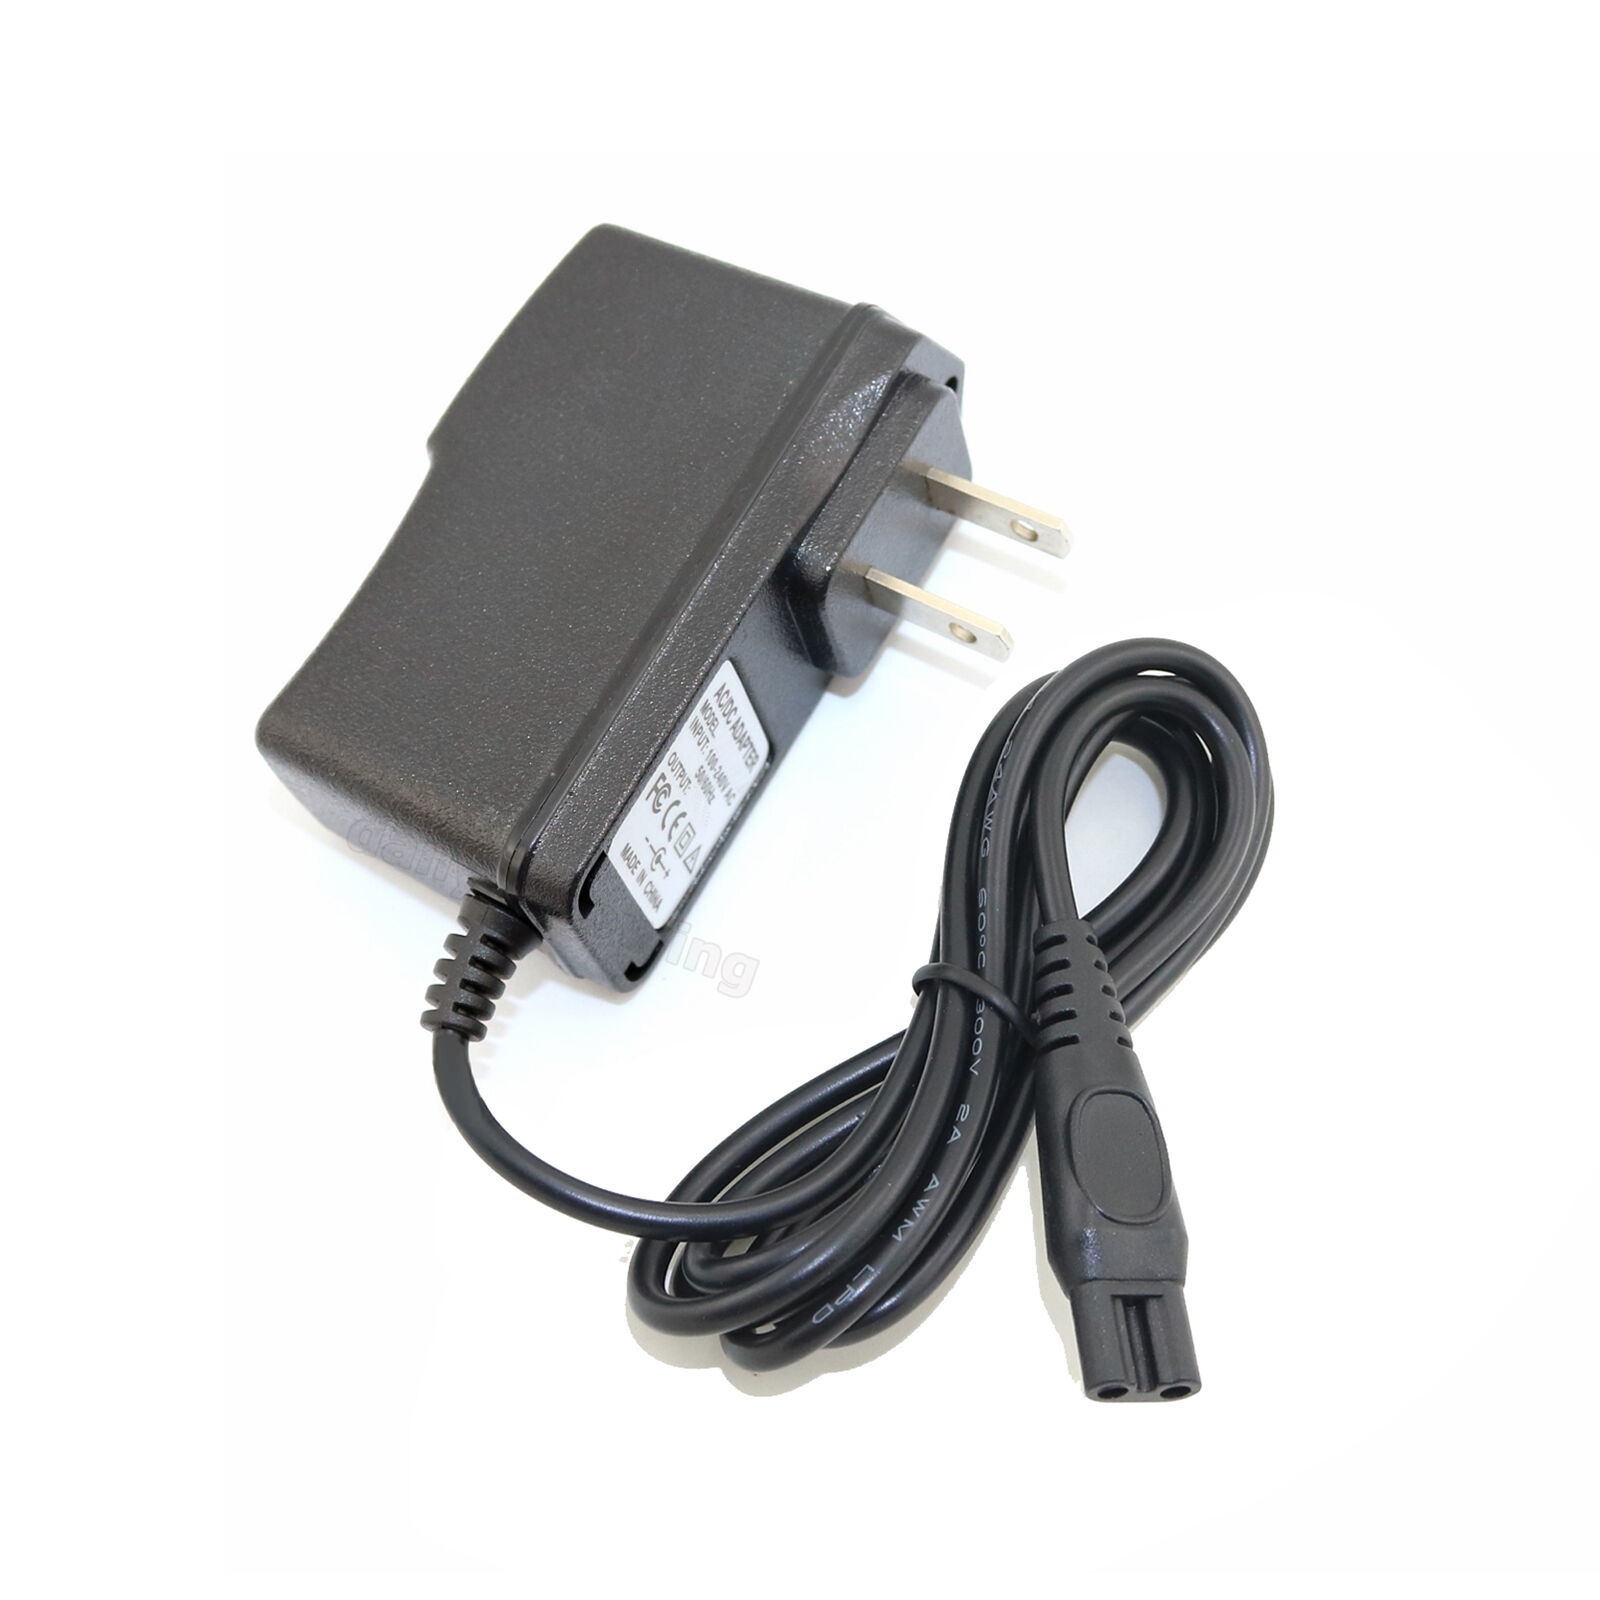 Primary image for Ac Charger Adapter For Philips Norelco Electric Shaver Qc5530/40 Qc5550 Qc5053